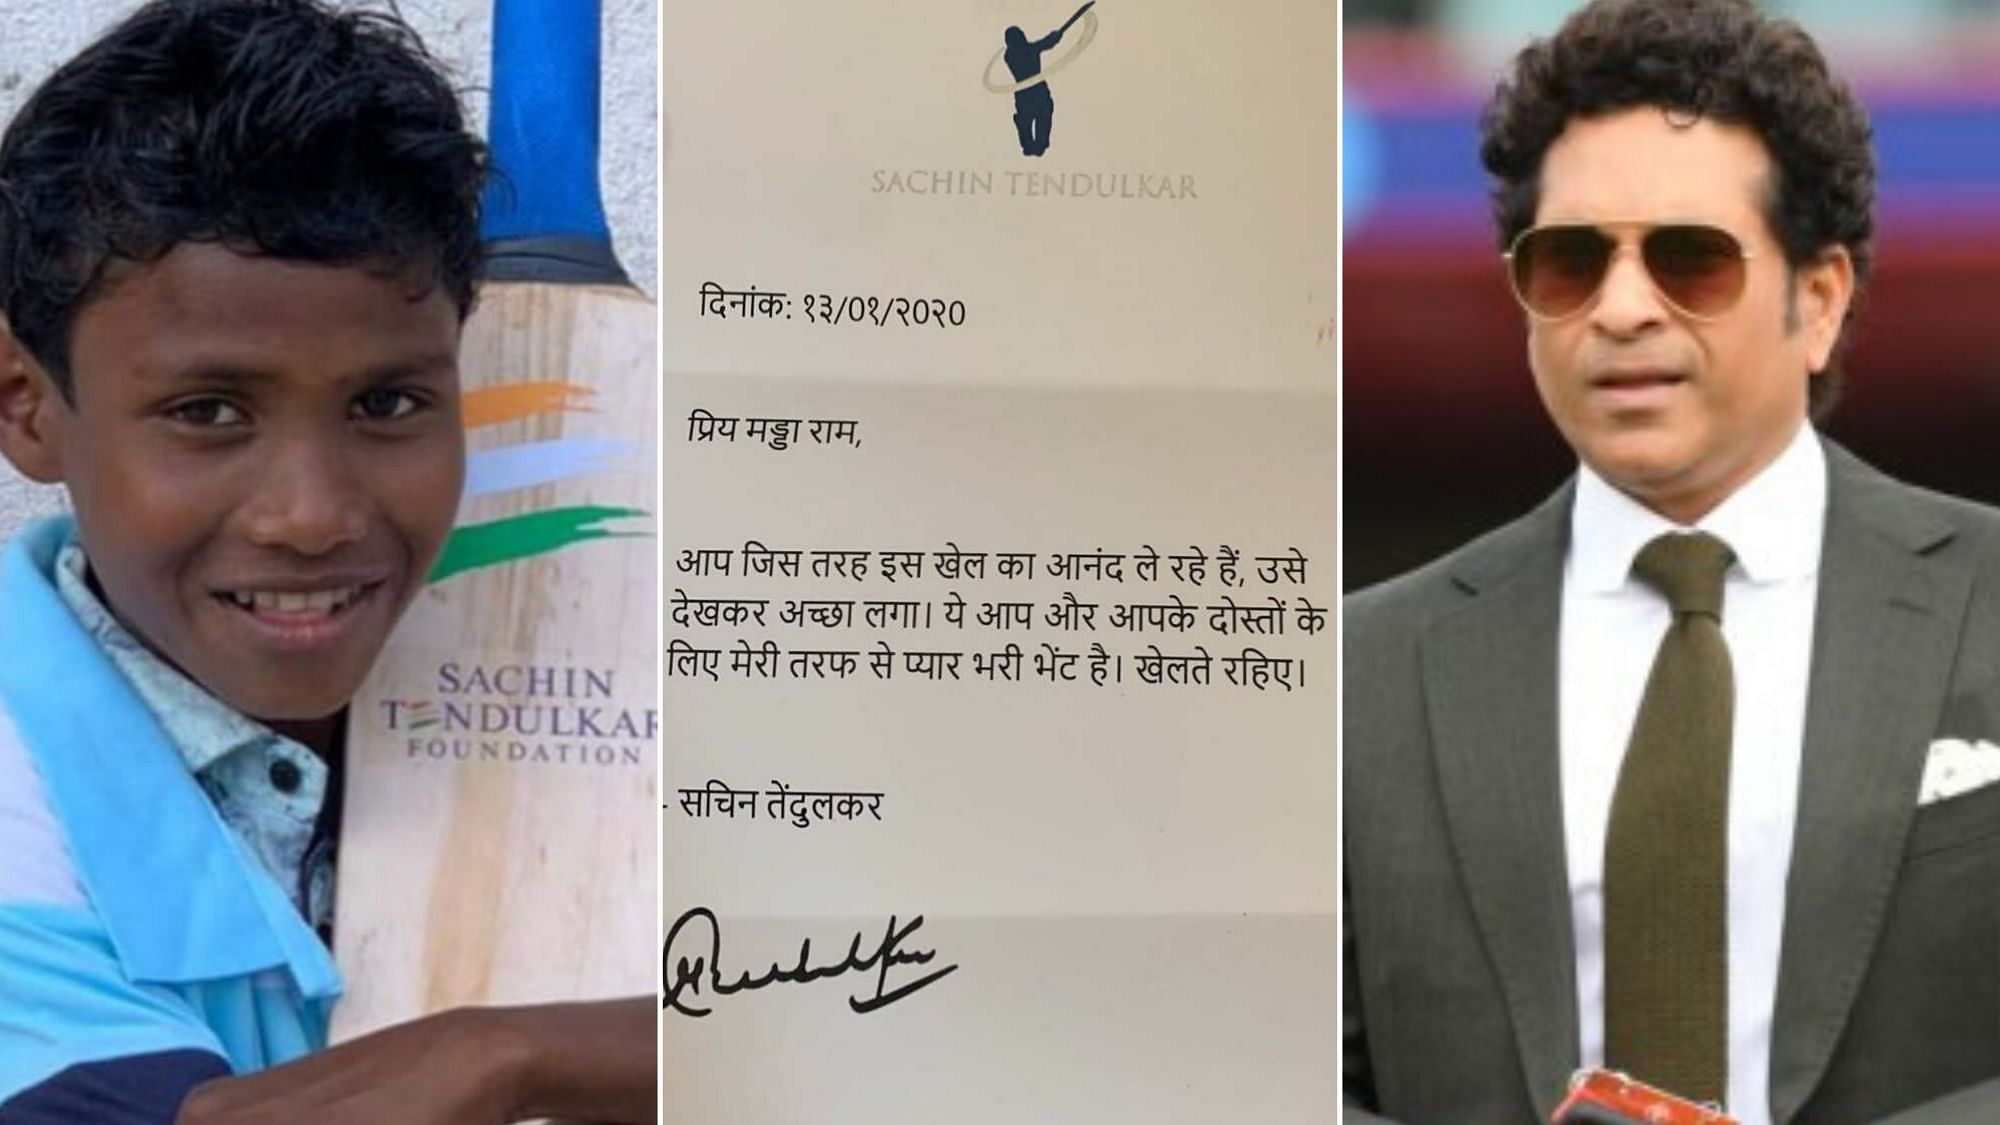 Cricket legend Sachin Tendulkar has gifted a cricket kit to a specially-abled boy from Bastar district. Tendulkar had earlier tweeted a video of the boy playing cricket with his friends on New Year’s Day.